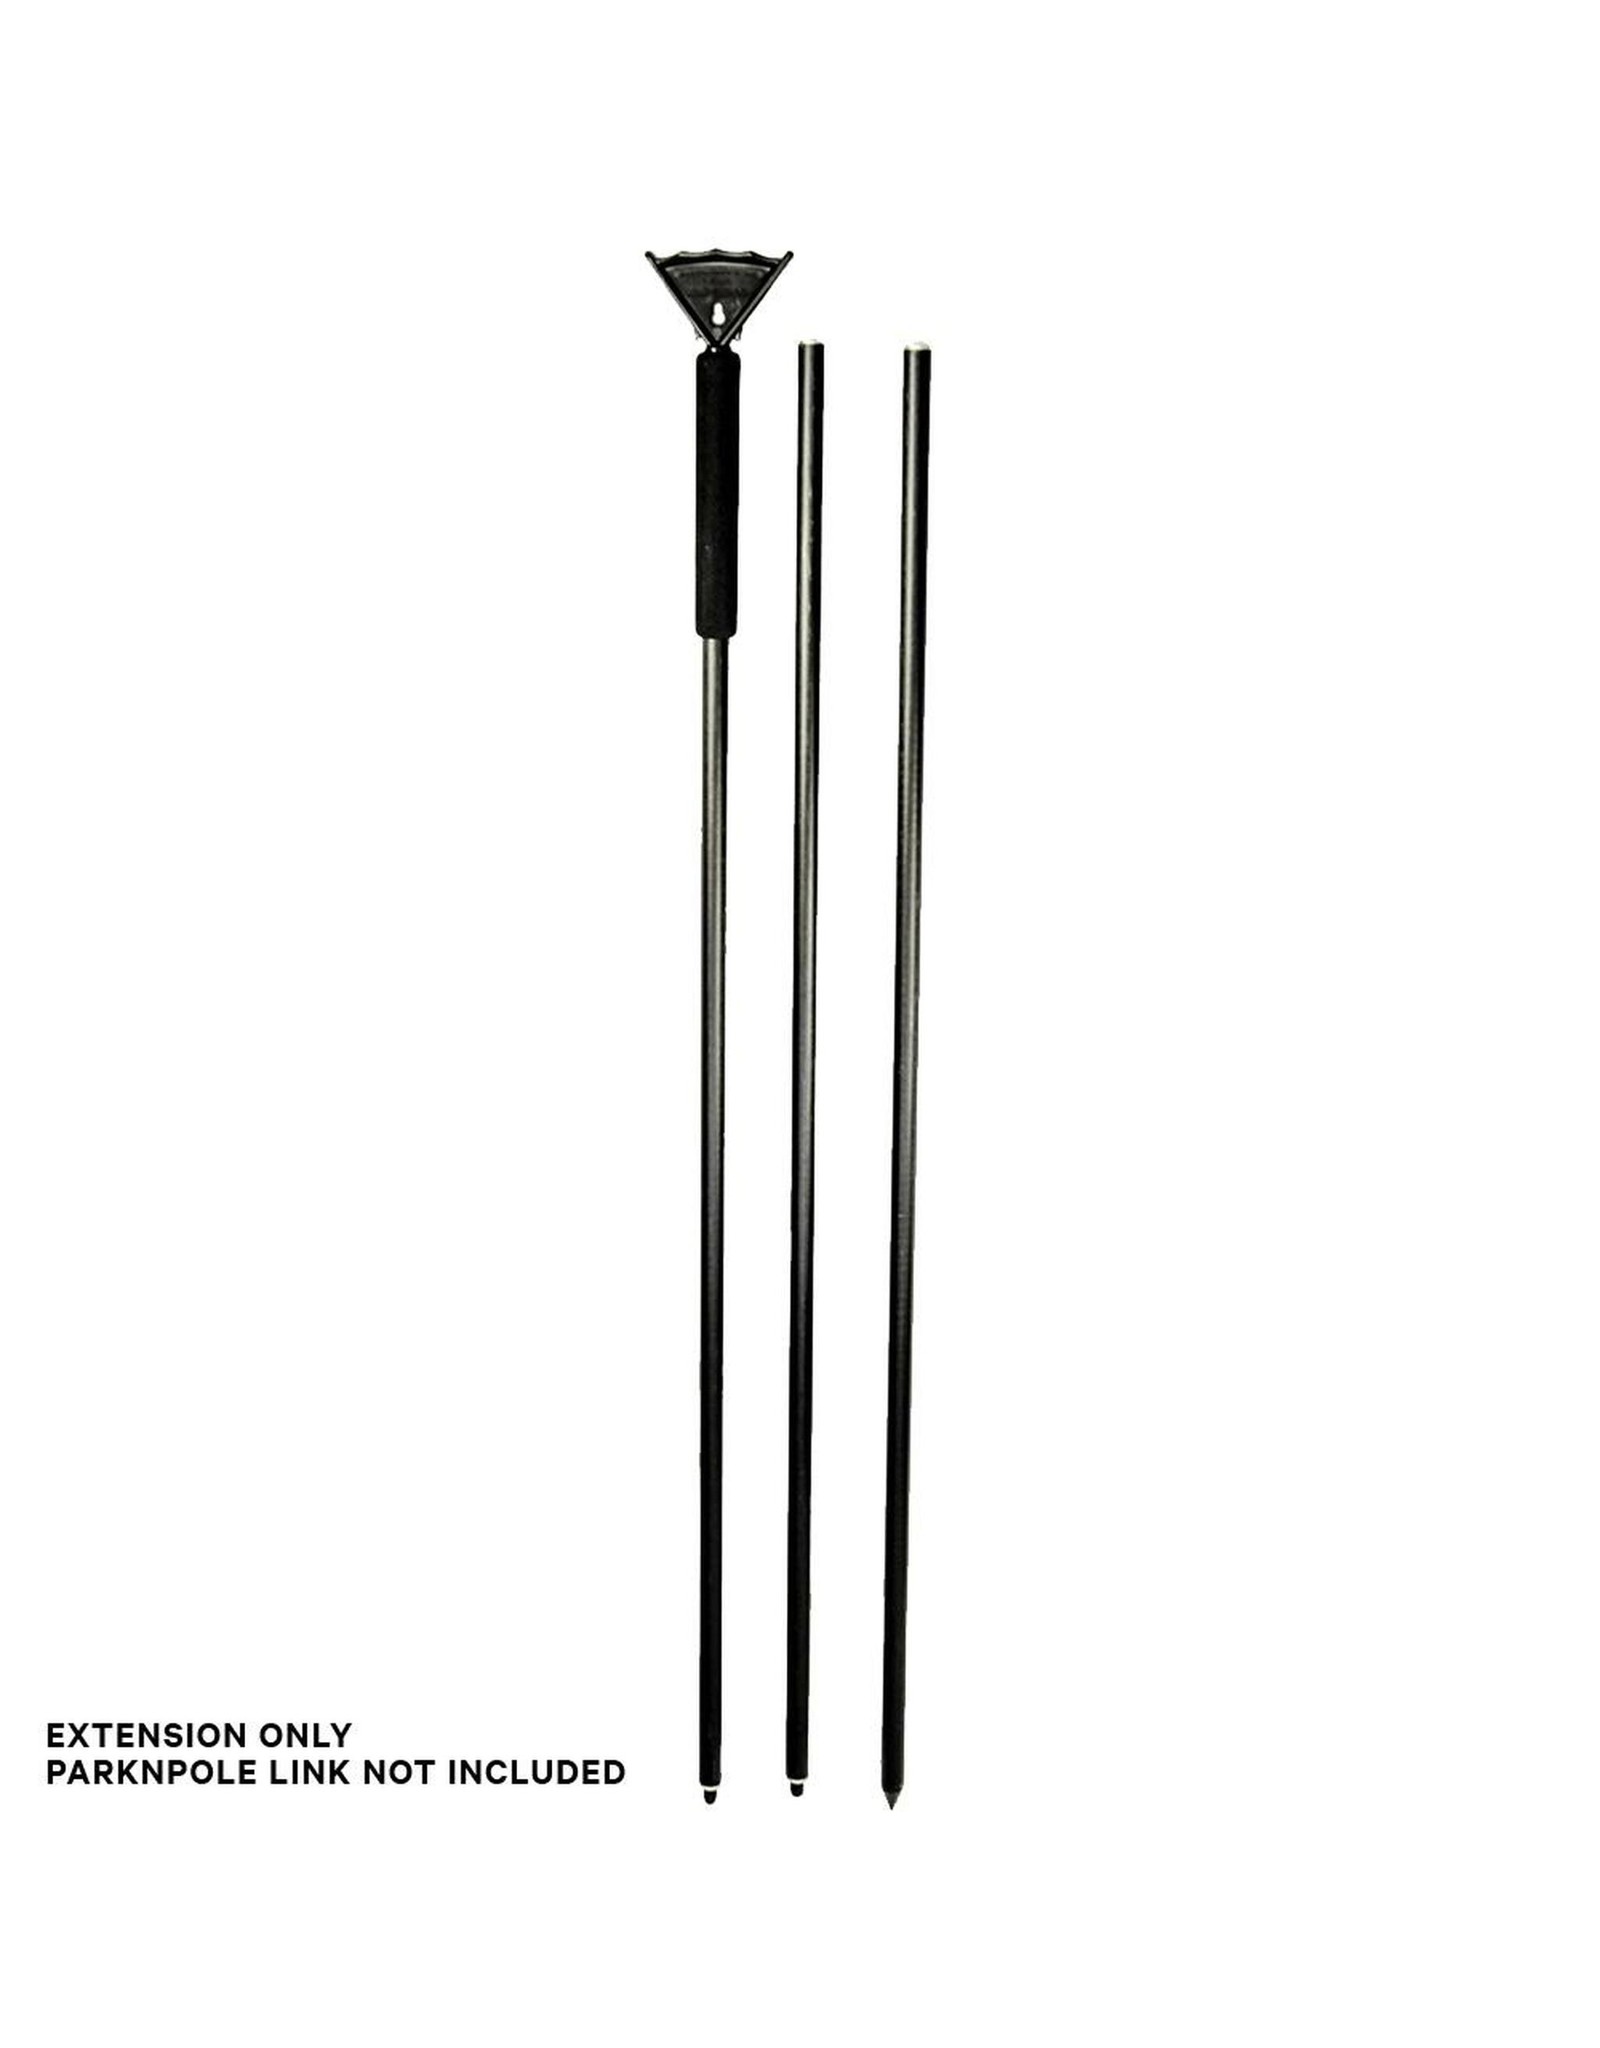 YakAttack YakAttack ParkNPole Link™ 46" Extension Only